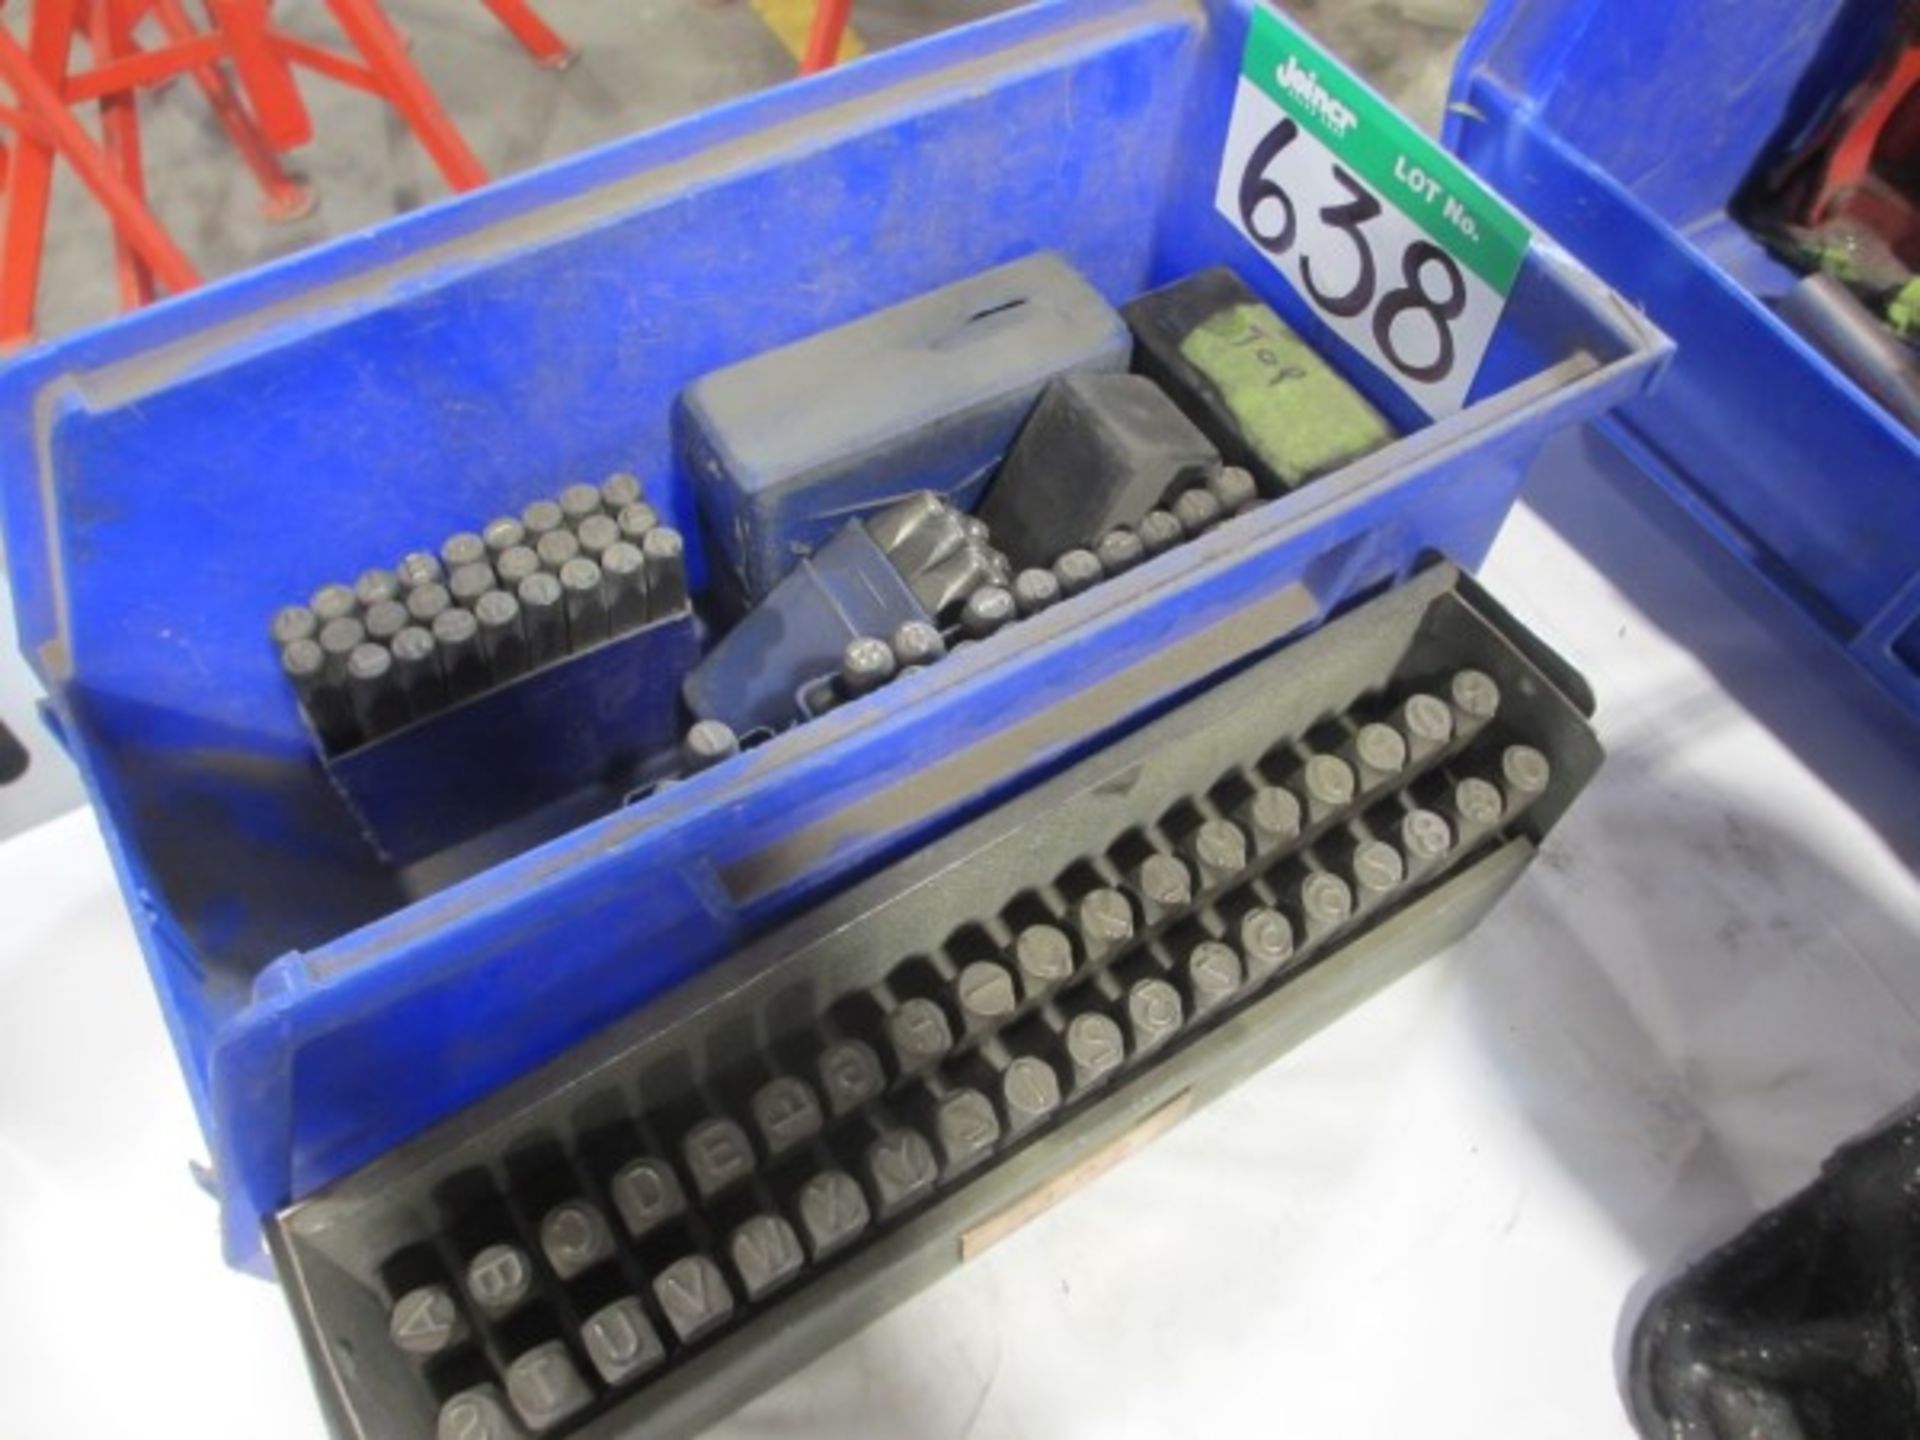 L2: LOT OF # AND LETTER PUNCHES